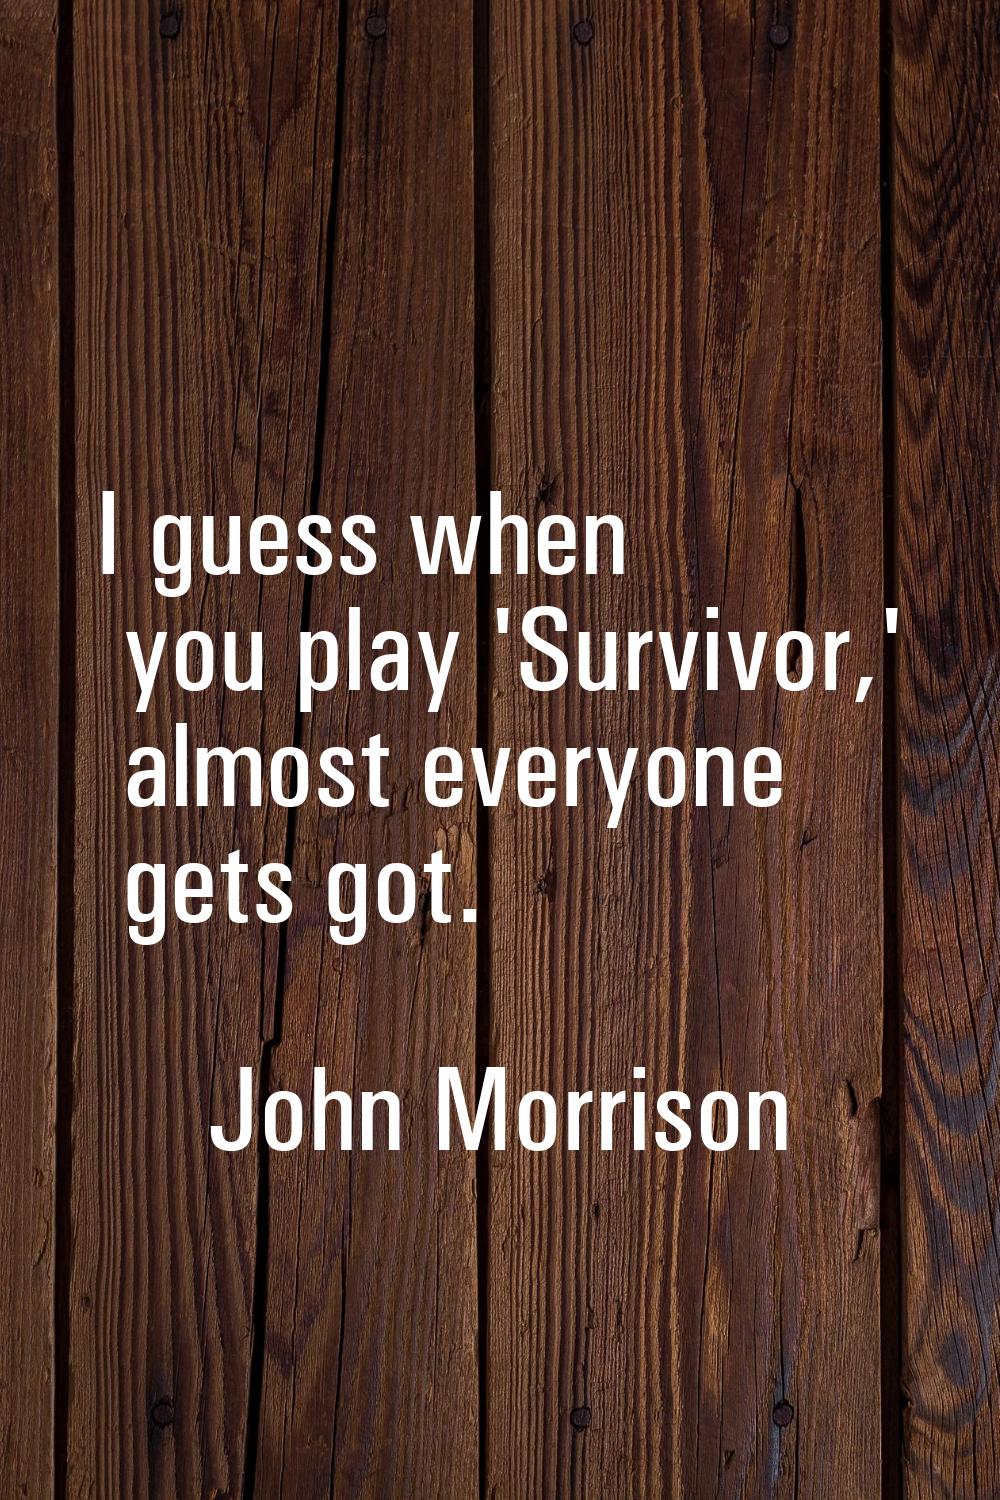 I guess when you play 'Survivor,' almost everyone gets got.